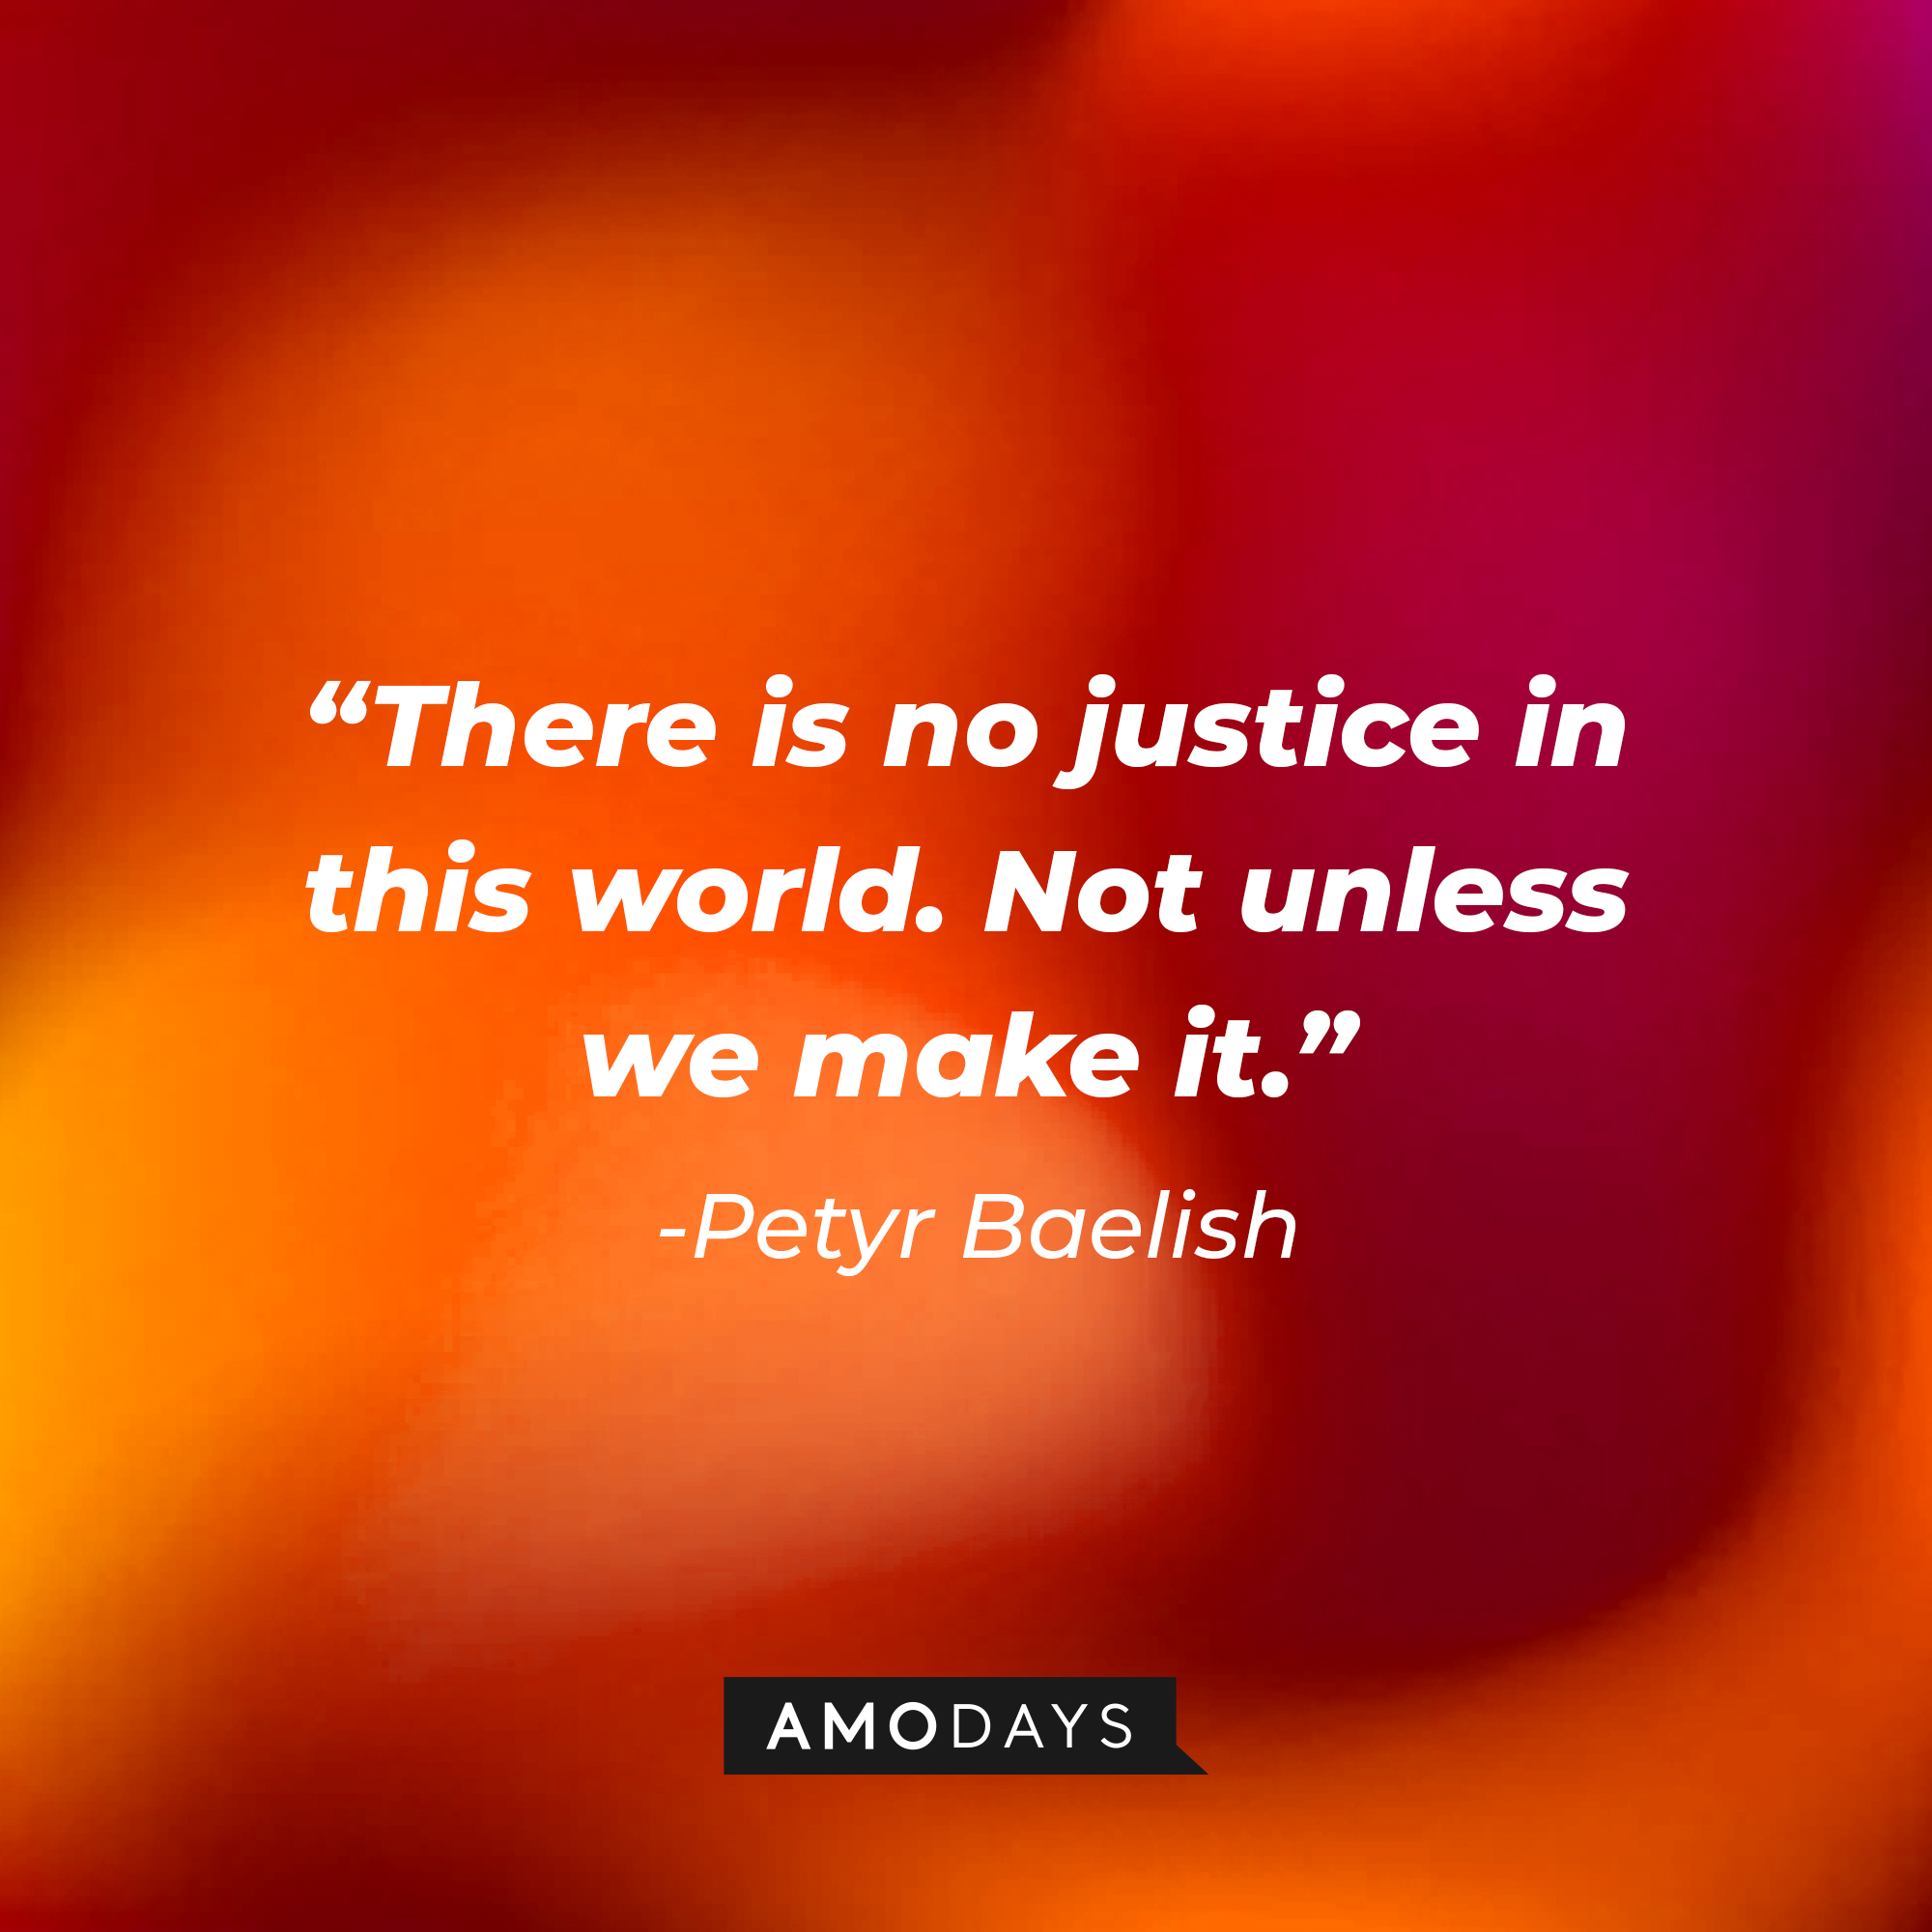 Petyr Baelish’s quote: “There is no justice in this world. Not unless we make it.” | Source: AmoDays